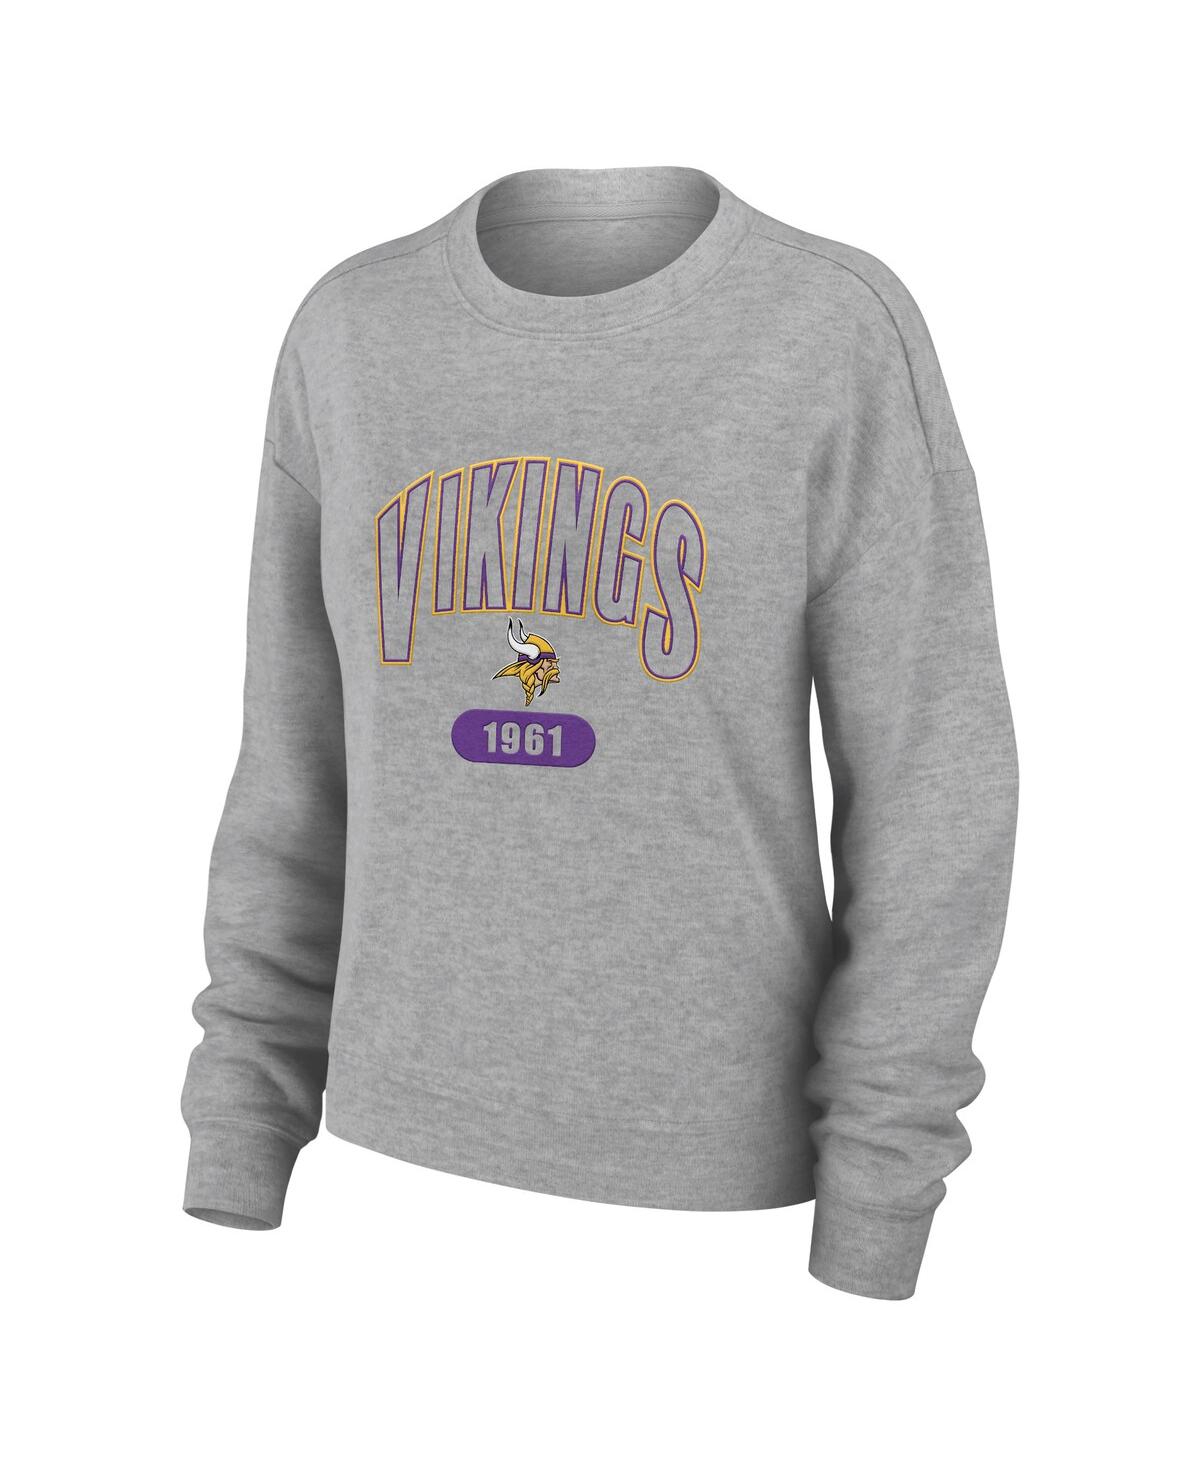 Shop Wear By Erin Andrews Women's  Heather Gray Minnesota Vikings Knit Long Sleeve Tri-blend T-shirt And P